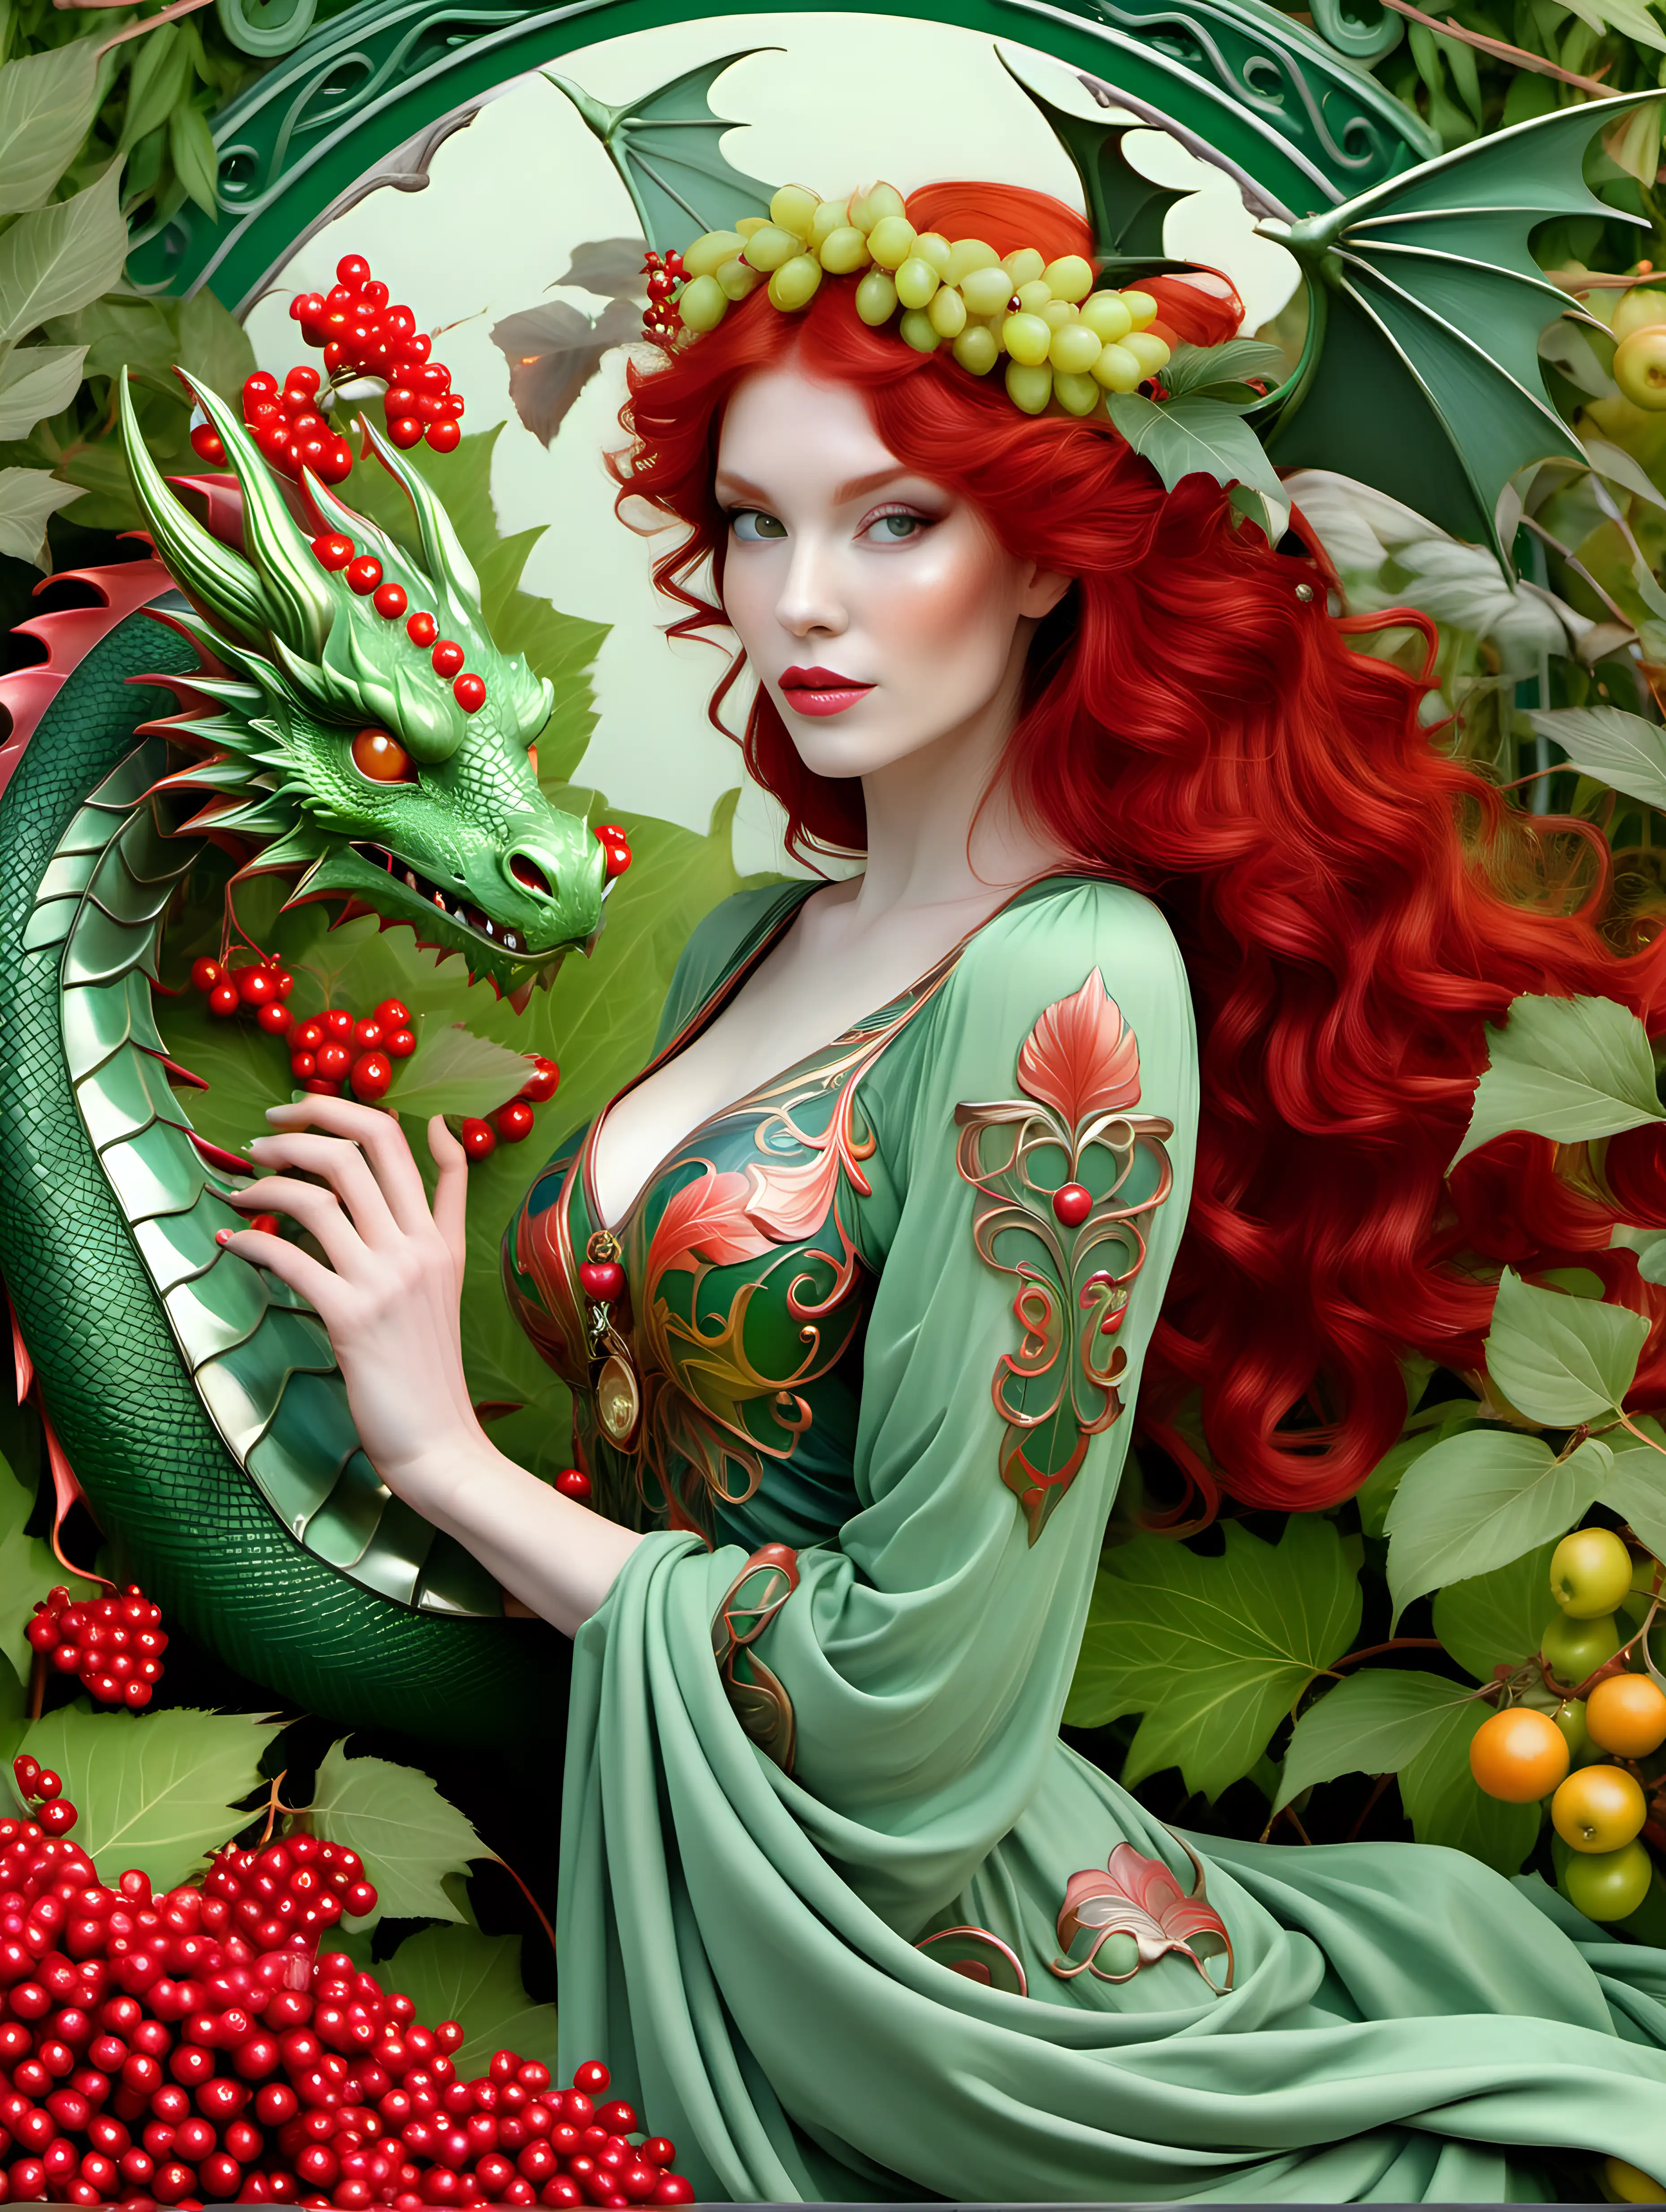 green dragon and beautiful woman red hairs  in a garden, red berries, colorful fruits, flowers, birds,  elegant, Art nouveau style, high resolution    